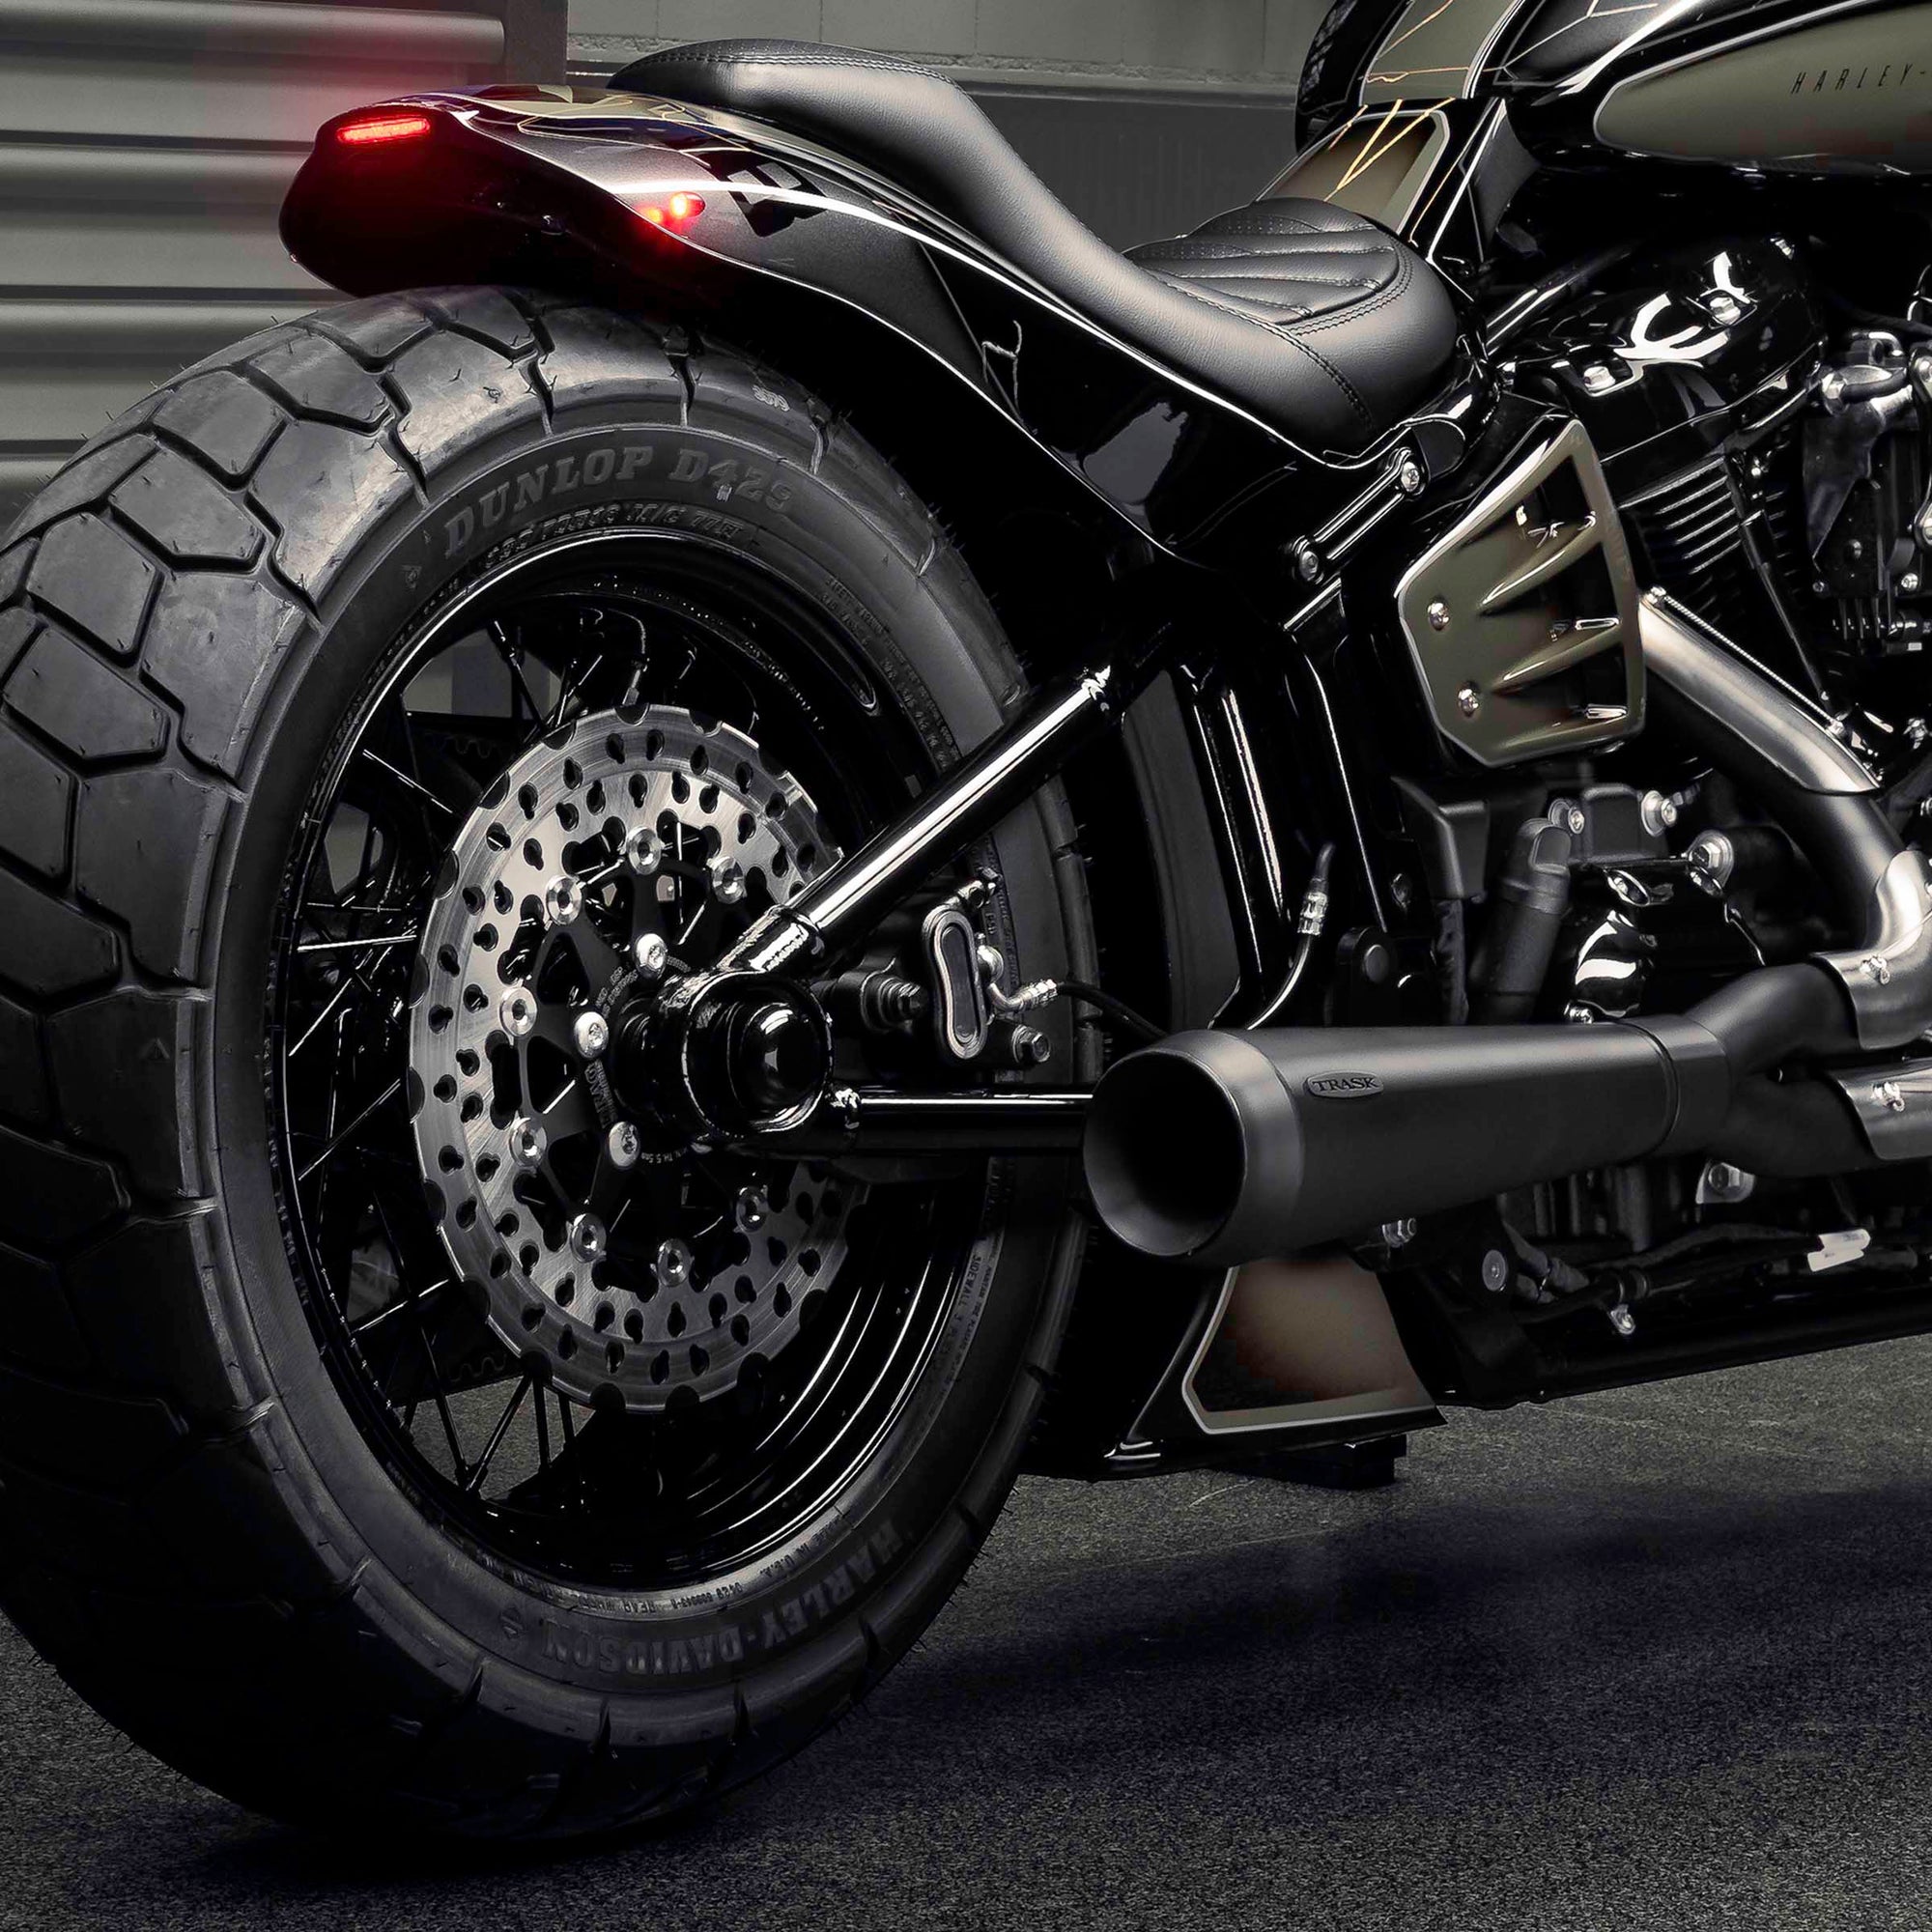 Zoomed Harley Davidson Street Bob motorcycle with Killer Custom parts from the side 